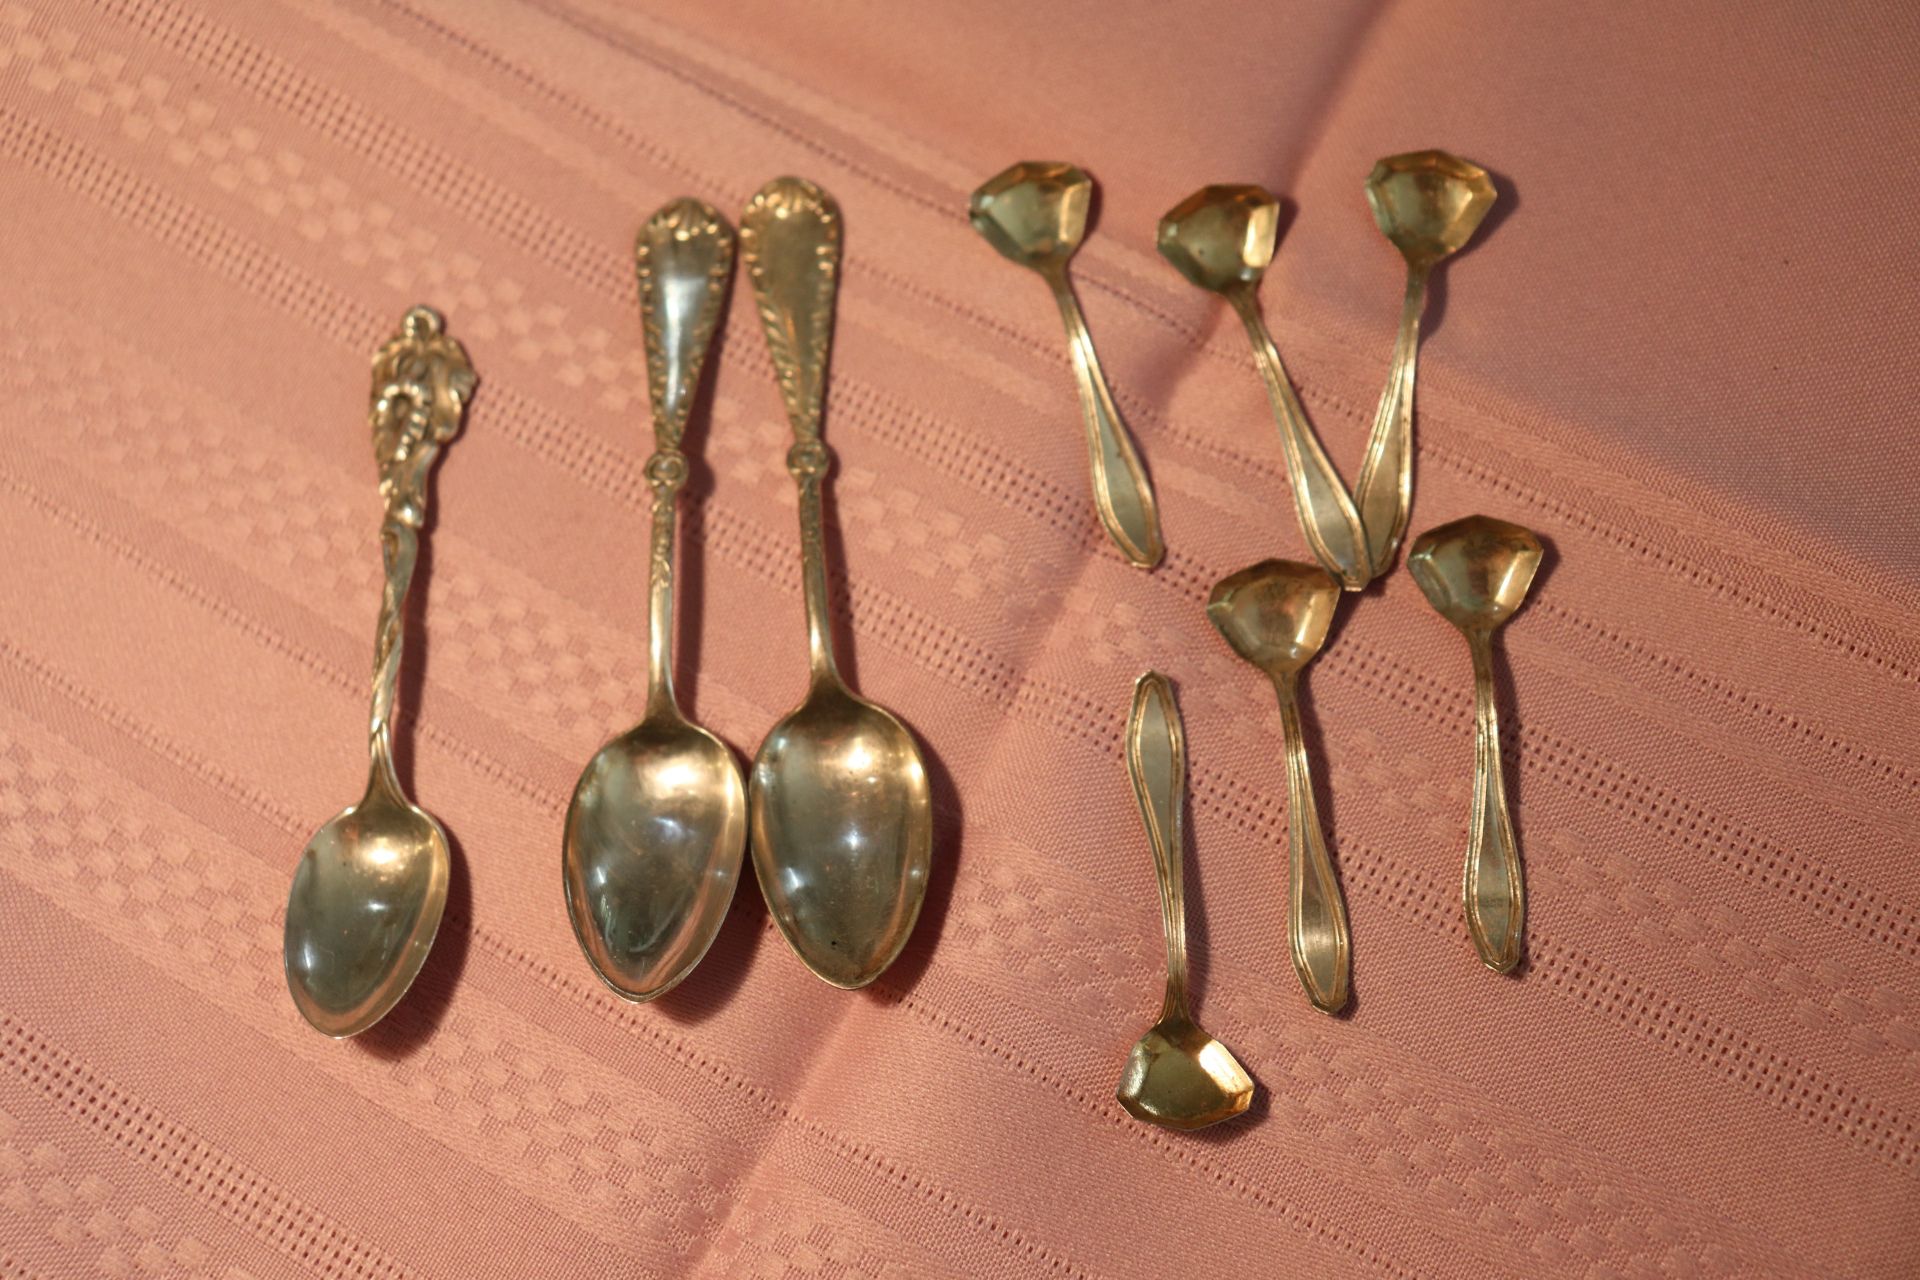 Assortment of sterling silver spoons, 8 pieces, approximate weight 1.39 ounces